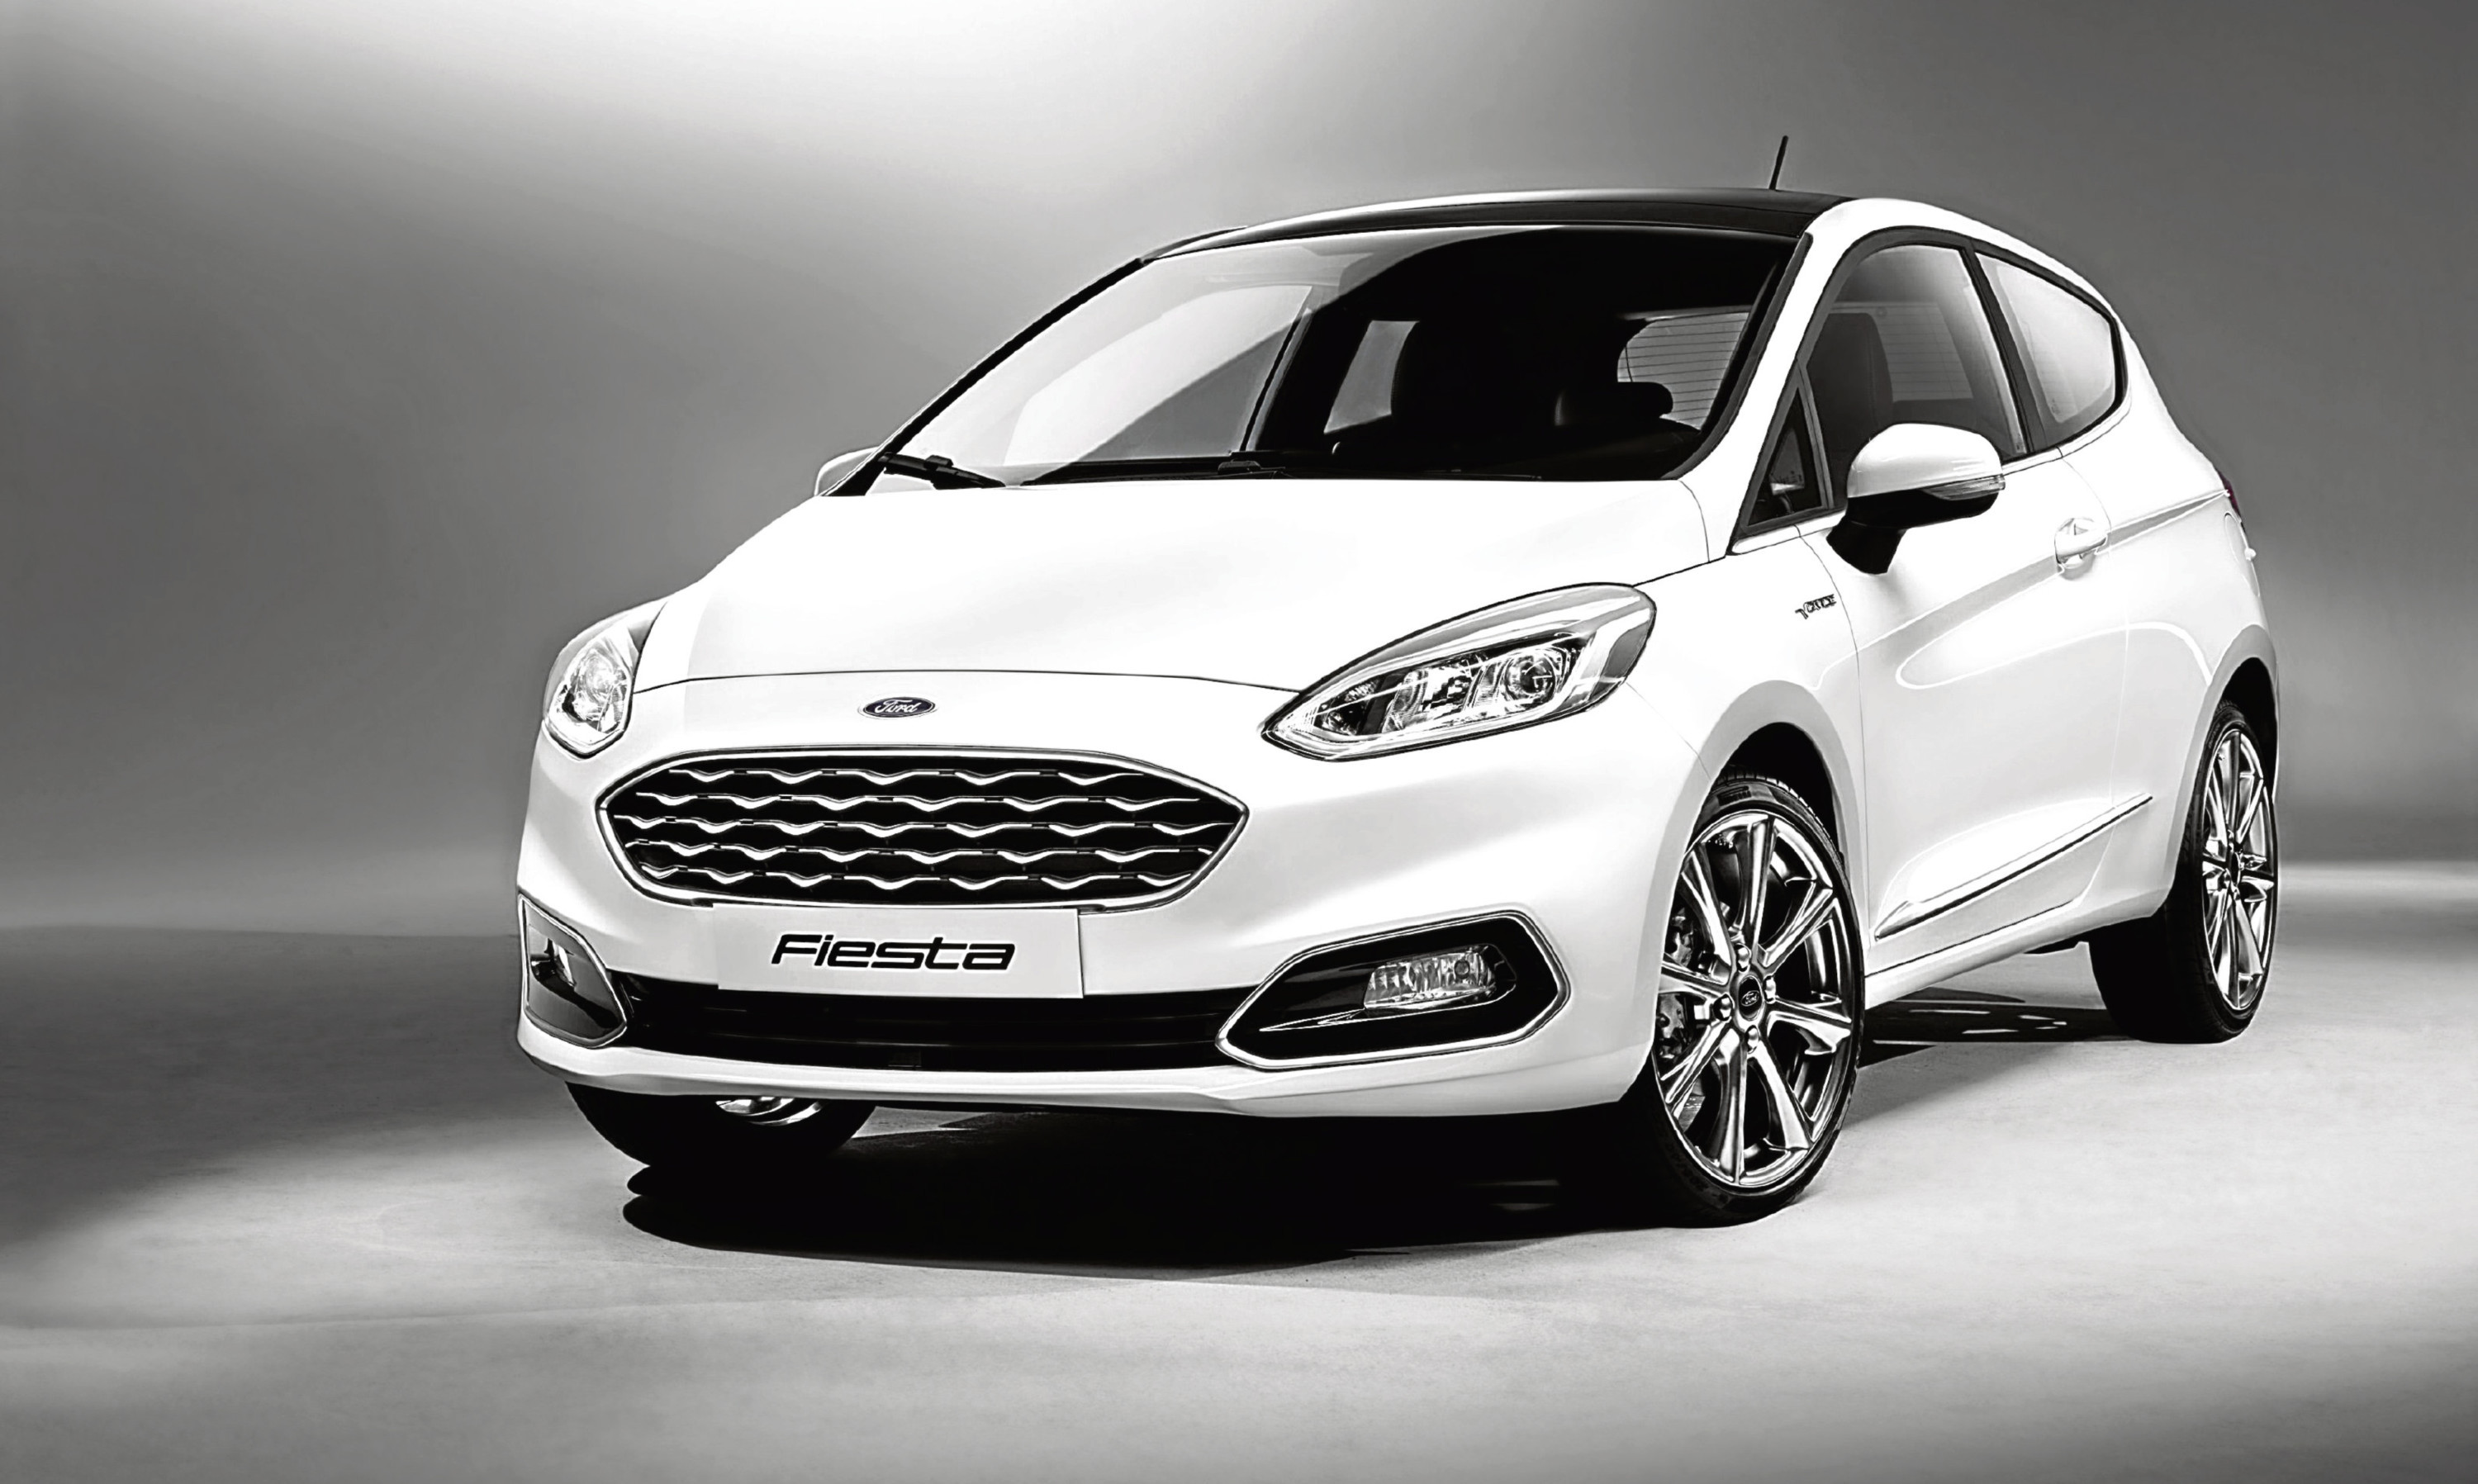 Undated Handout Photo of the new Ford Fiesta. See PA Feature MOTORING News. Picture credit should read: Ford/PA Photo. WARNING: This picture must only be used to accompany PA Feature MOTORING News.